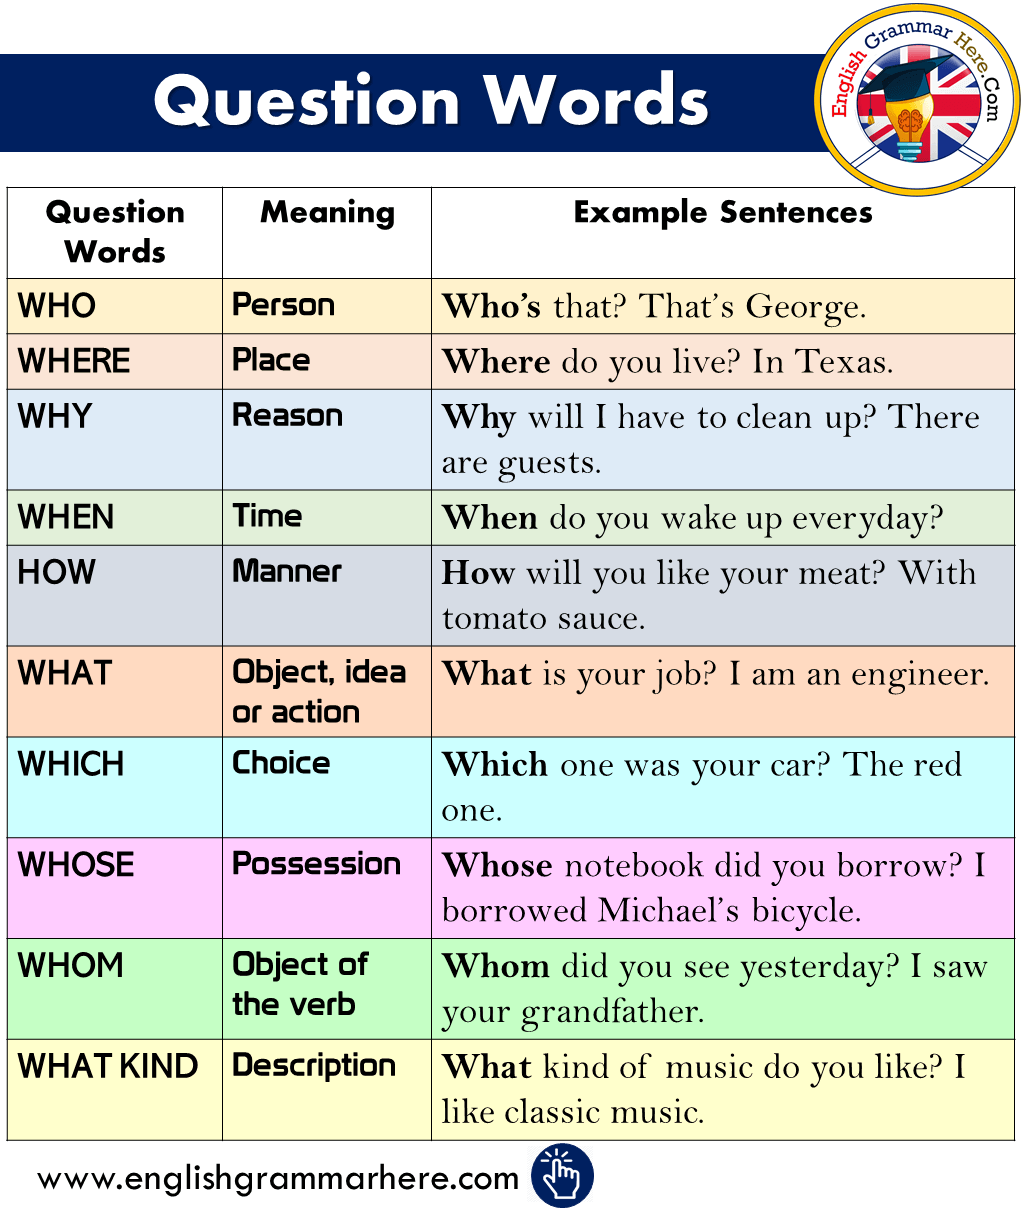 Question Words, Meanings and Example Sentences